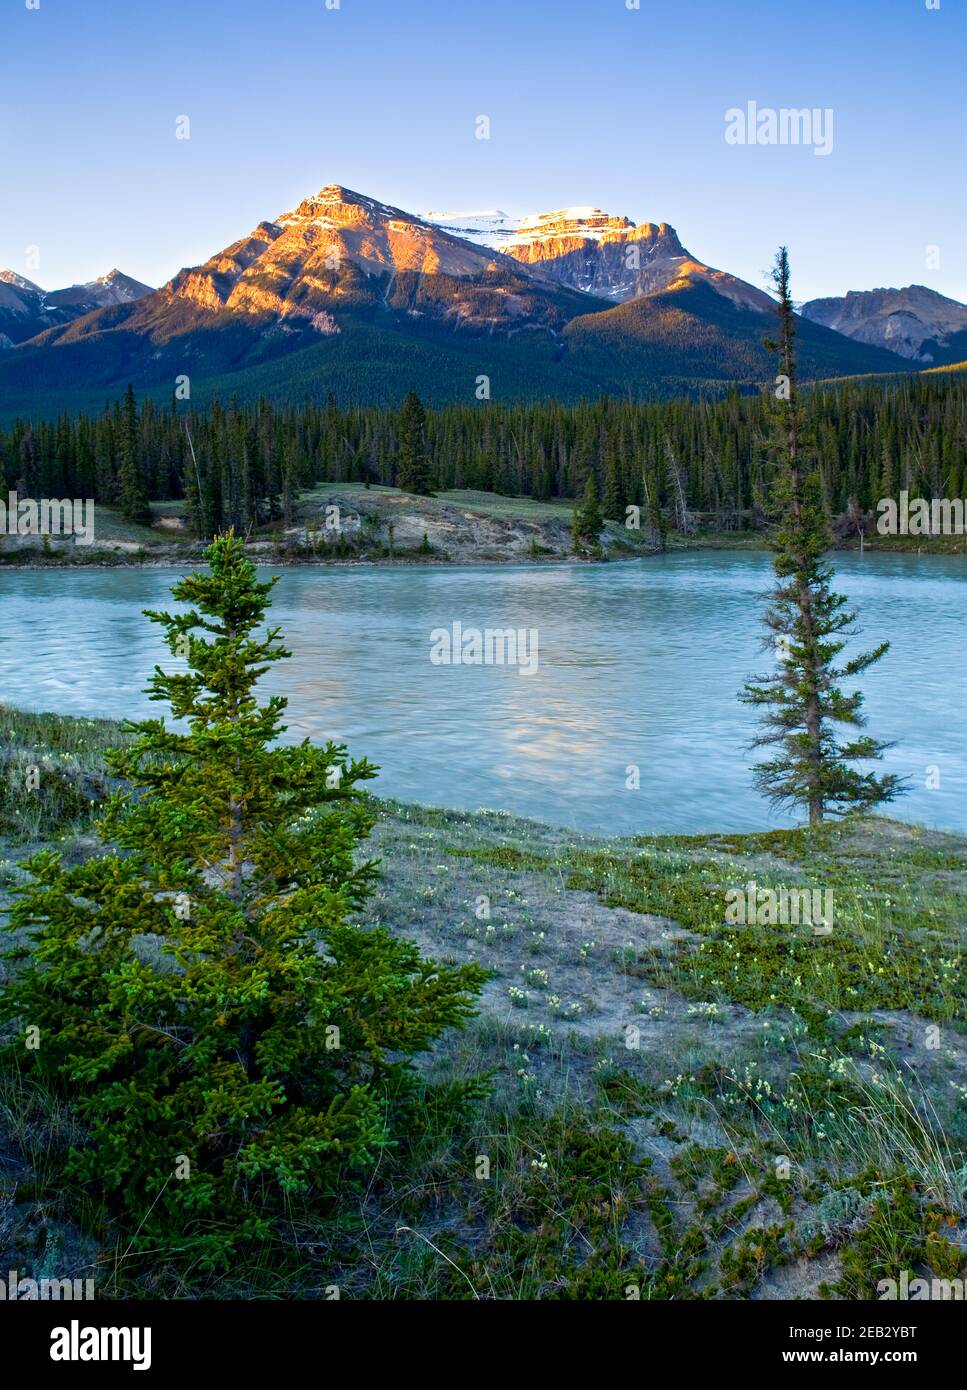 A mountain and river in the Canadian Rockies, Alberta, Canada Stock Photo